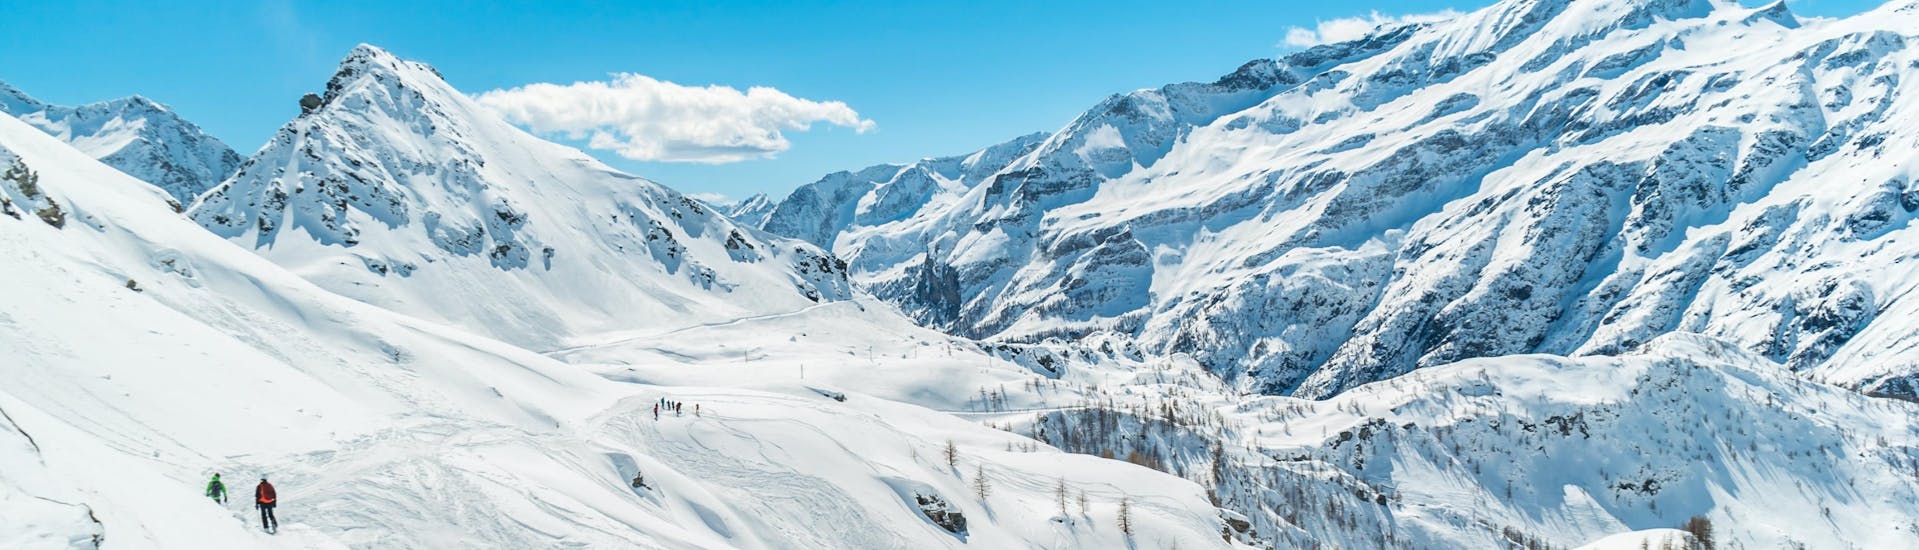 A few skiers are gliding through the snowy landscape in Gressoney in the Monte Rosa ski area, where local ski schools offer their ski lessons.